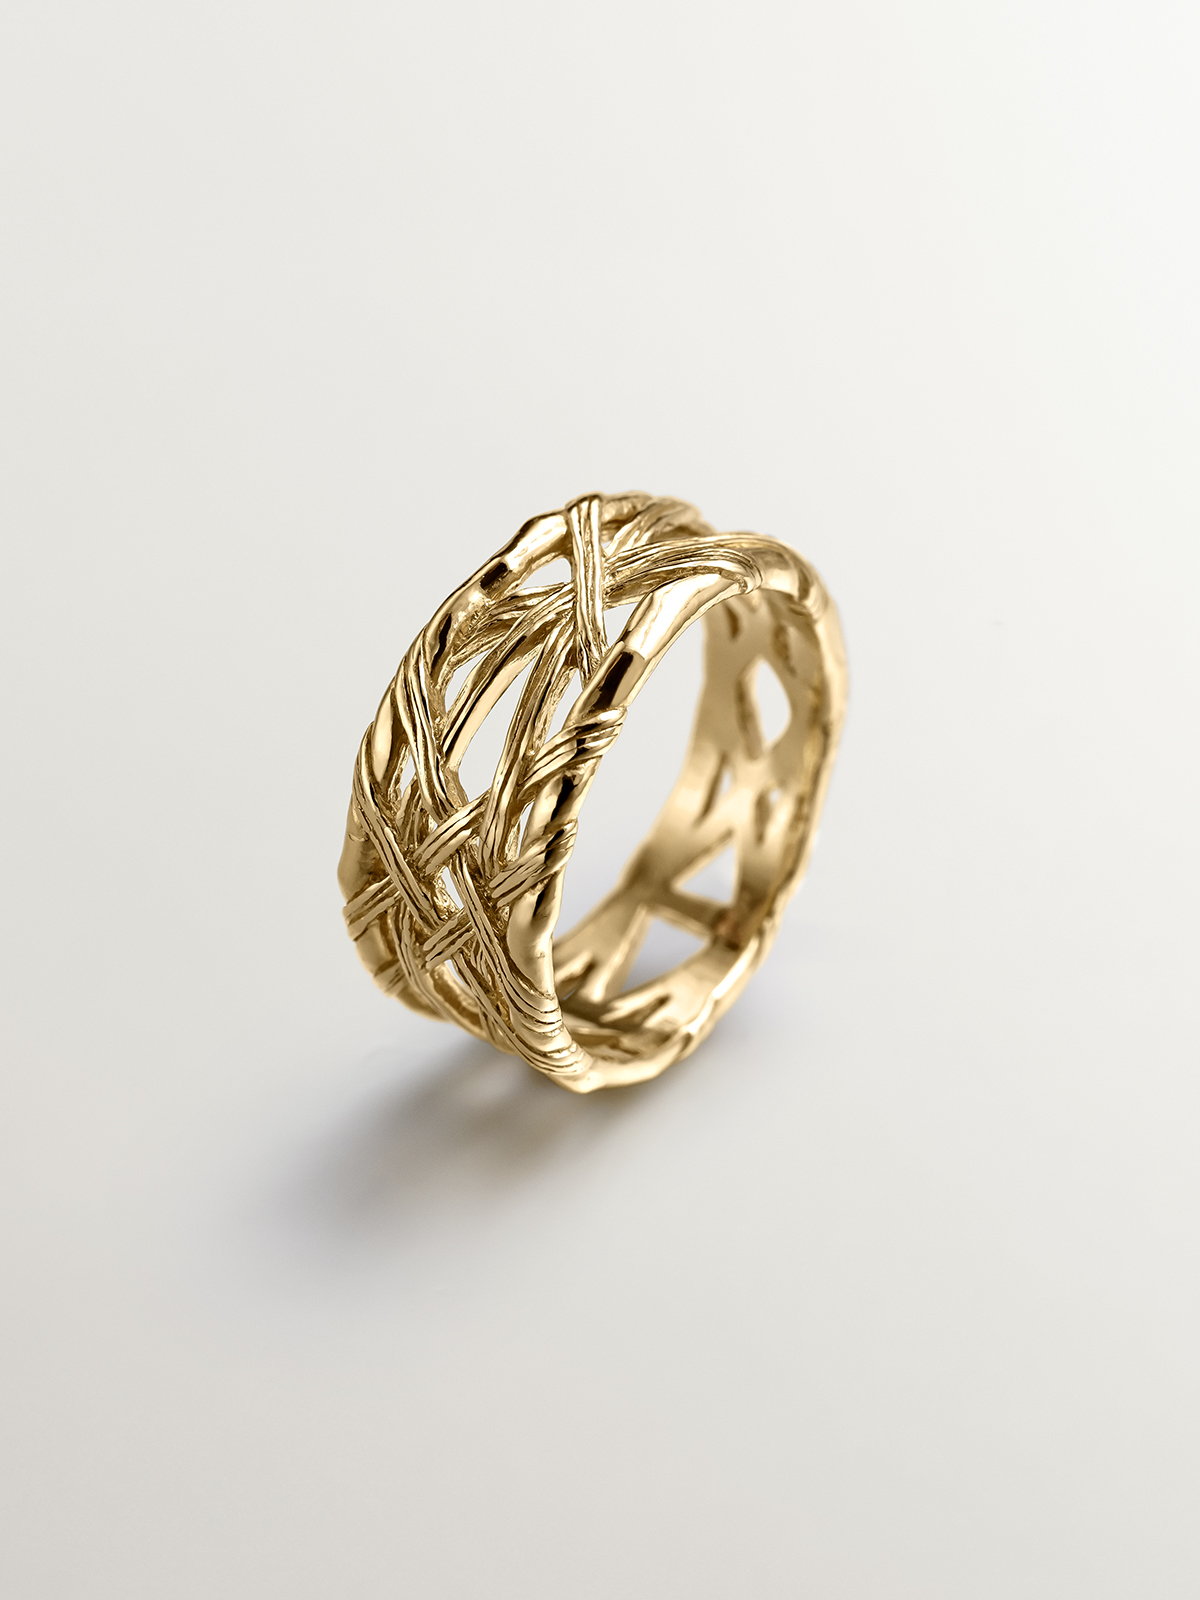 925 Silver ring bathed in 18K yellow gold with wicker texture.